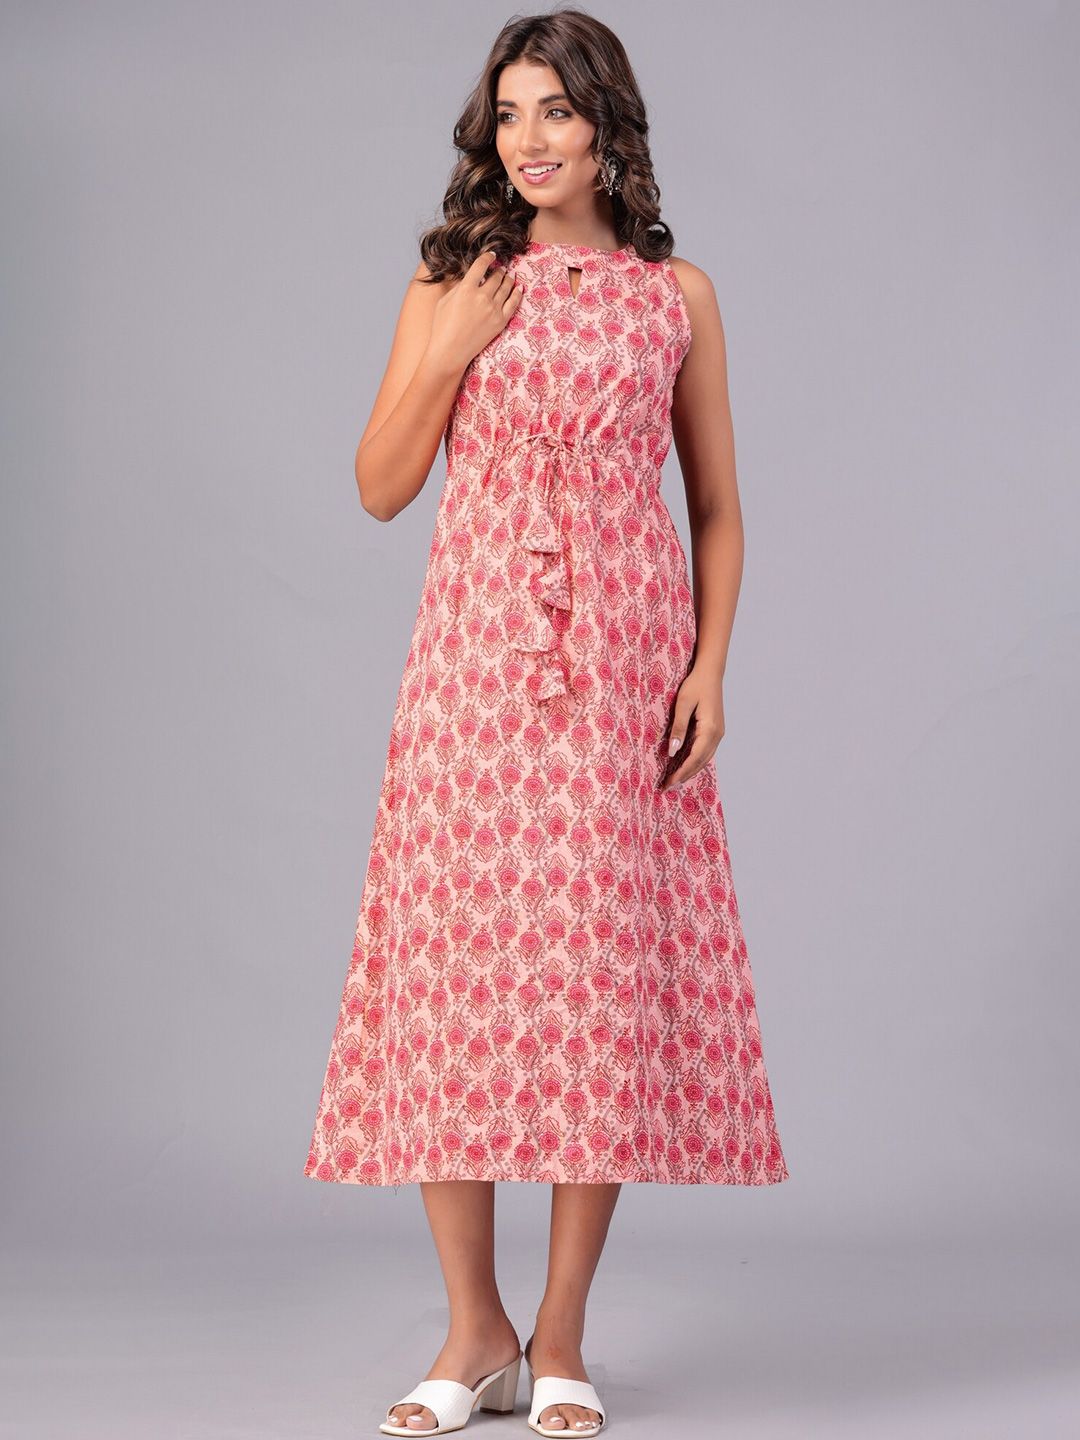 EtnicaWear Floral Print Keyhole Neck Cotton A-Line Midi Dress Price in India